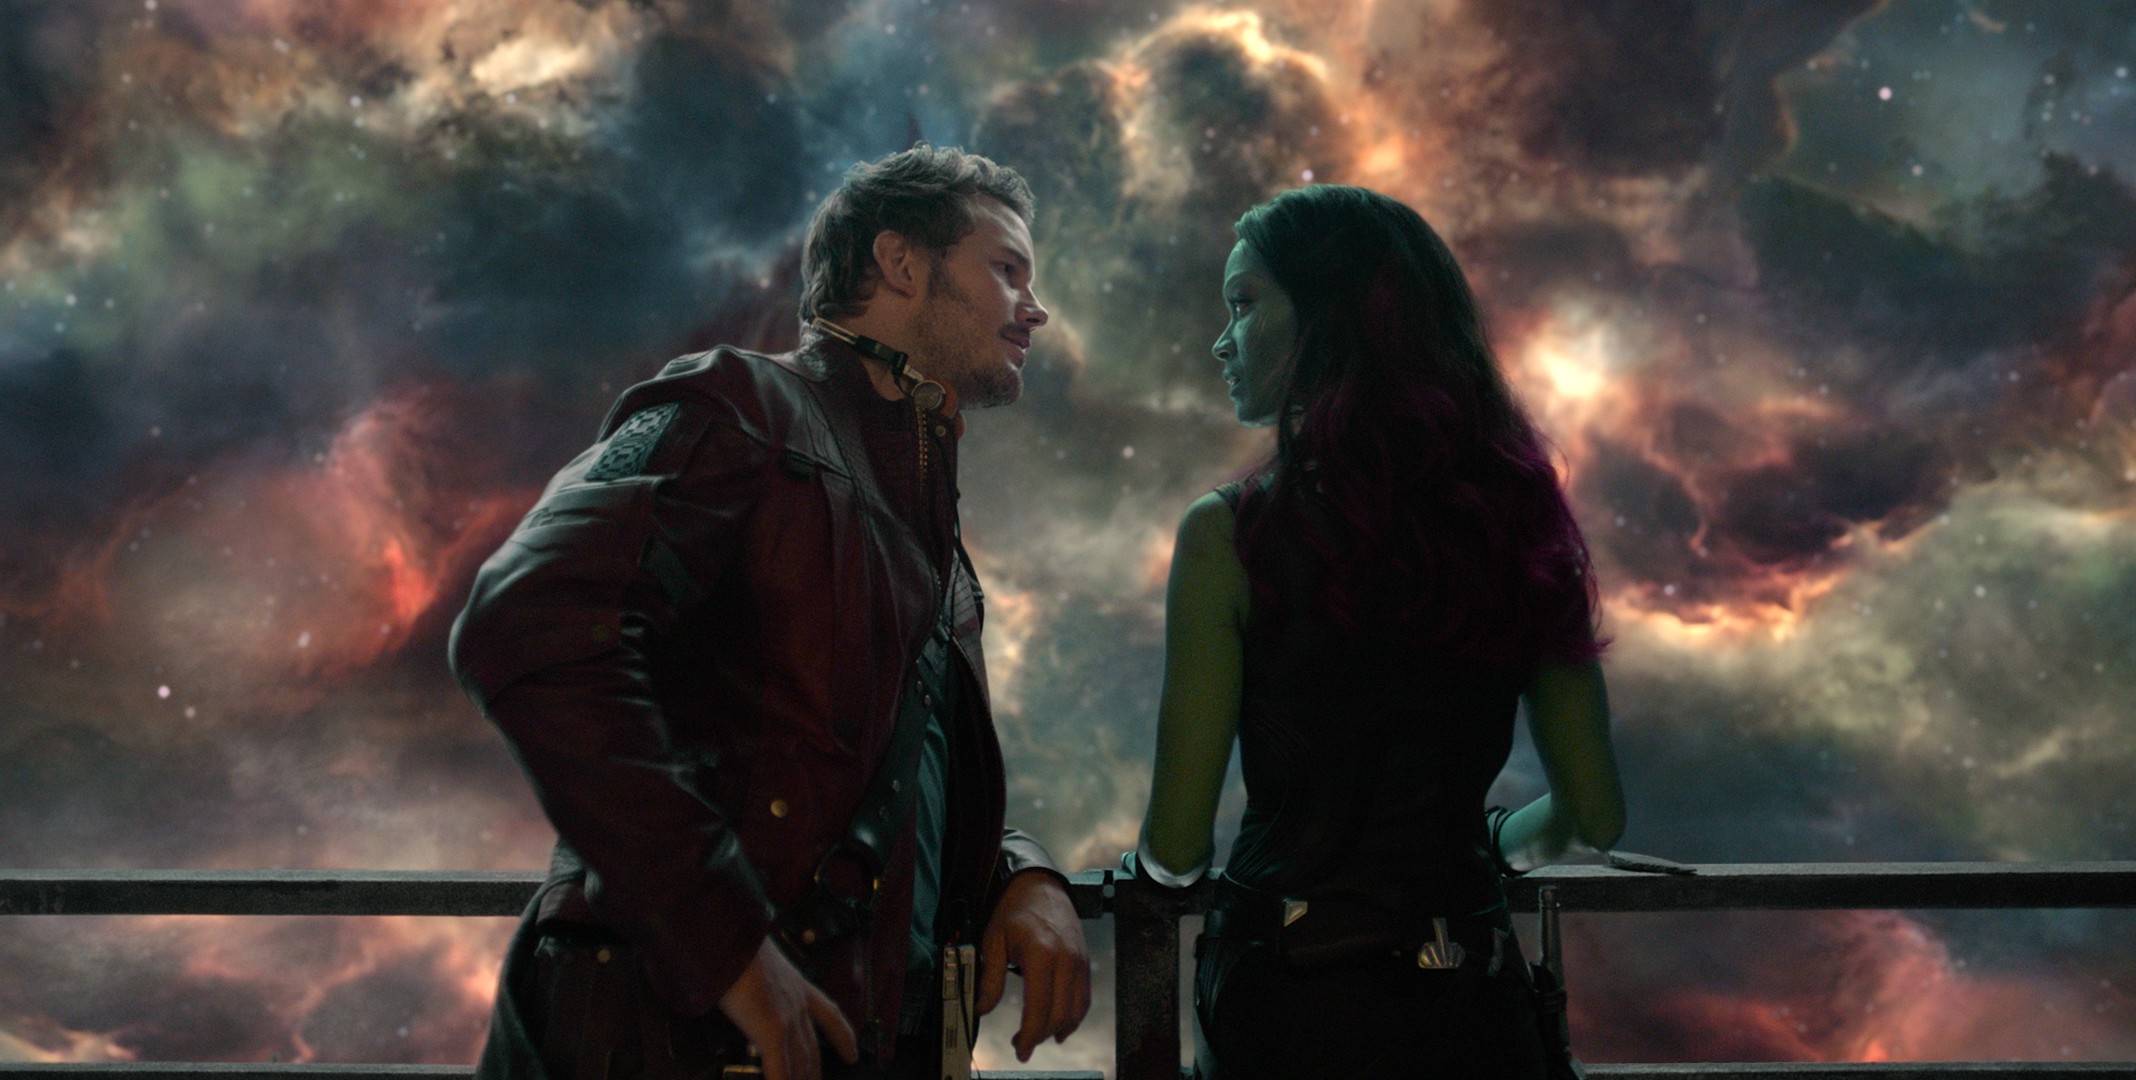 Spider-Man, Star-Lord and Gamora All Confirmed For Avengers: Infinity War